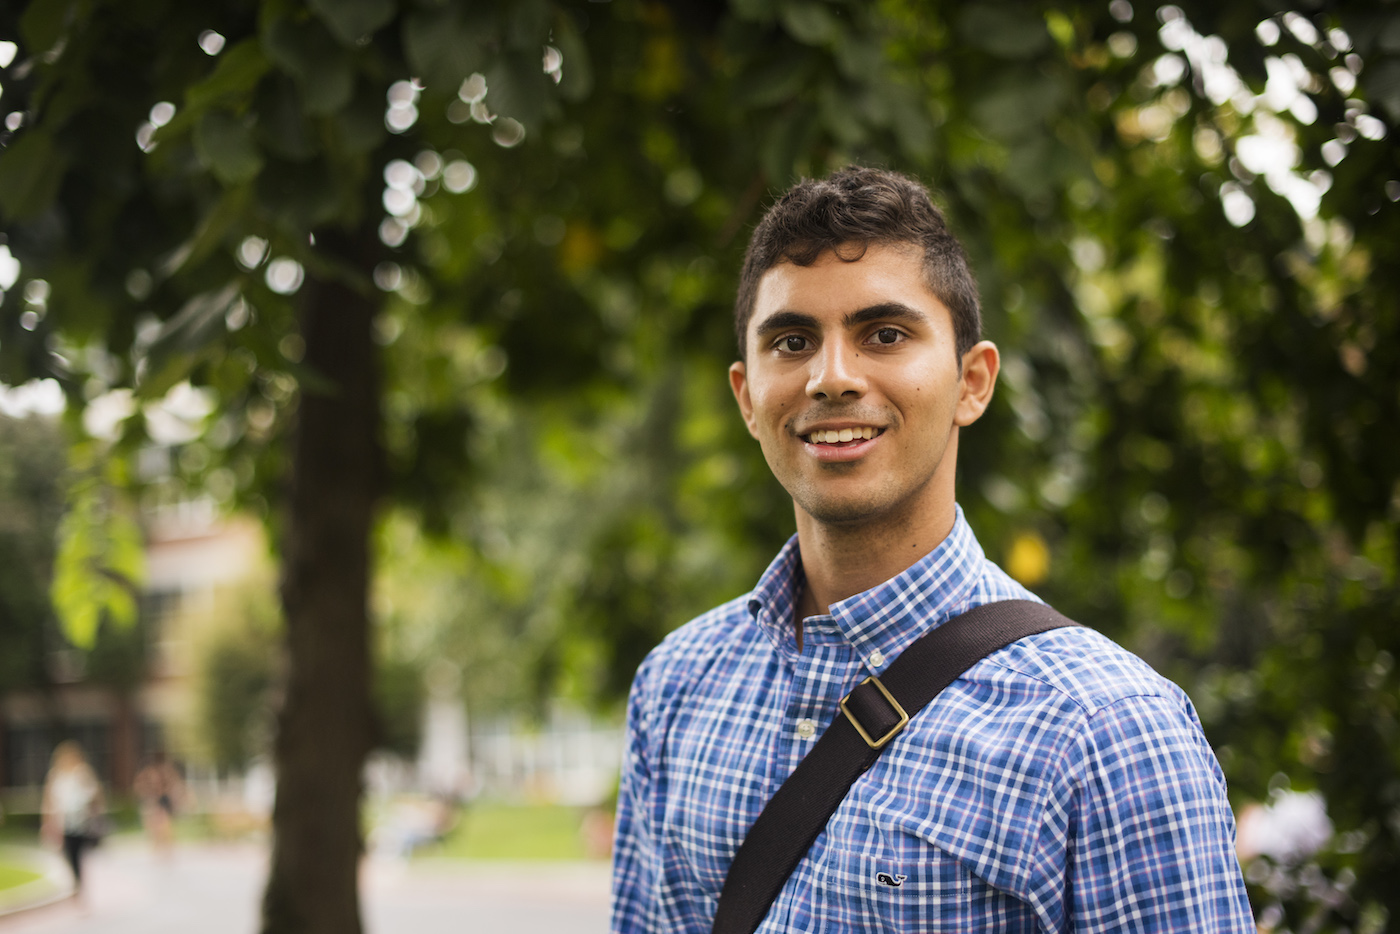 Pranav Ahluwalia, CIS’22, poses for a portrait on Centennial Common on the first day of class on Sept. 6, 2017. Photo by Adam Glanzman/Northeastern University